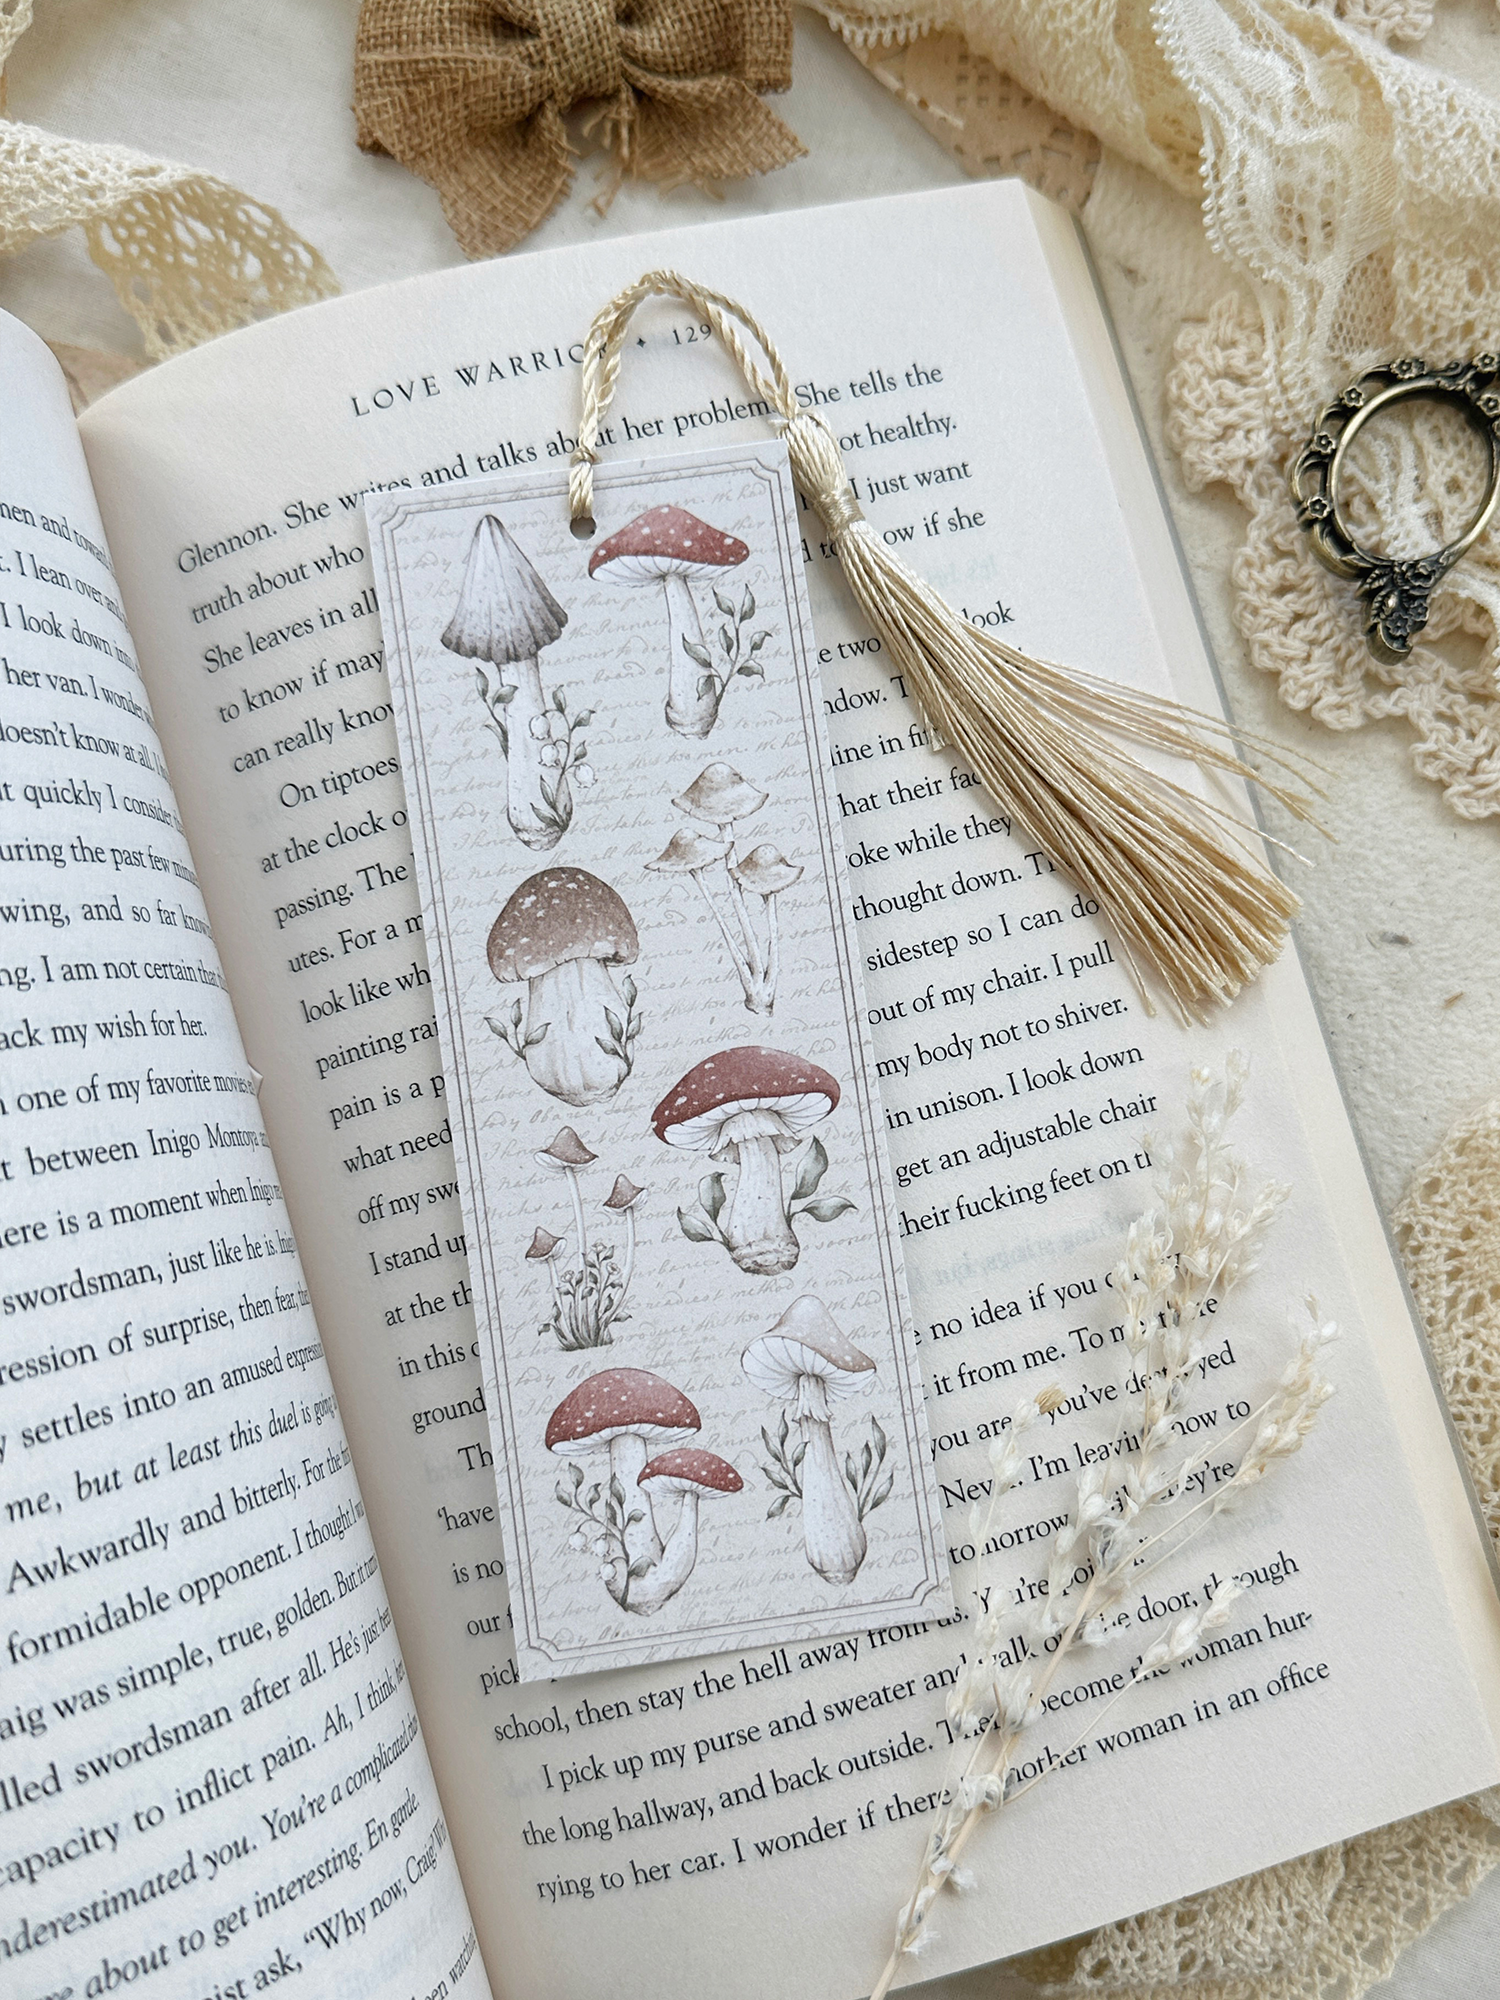 I made this cute little mushroom bookmark for my partner! It was a